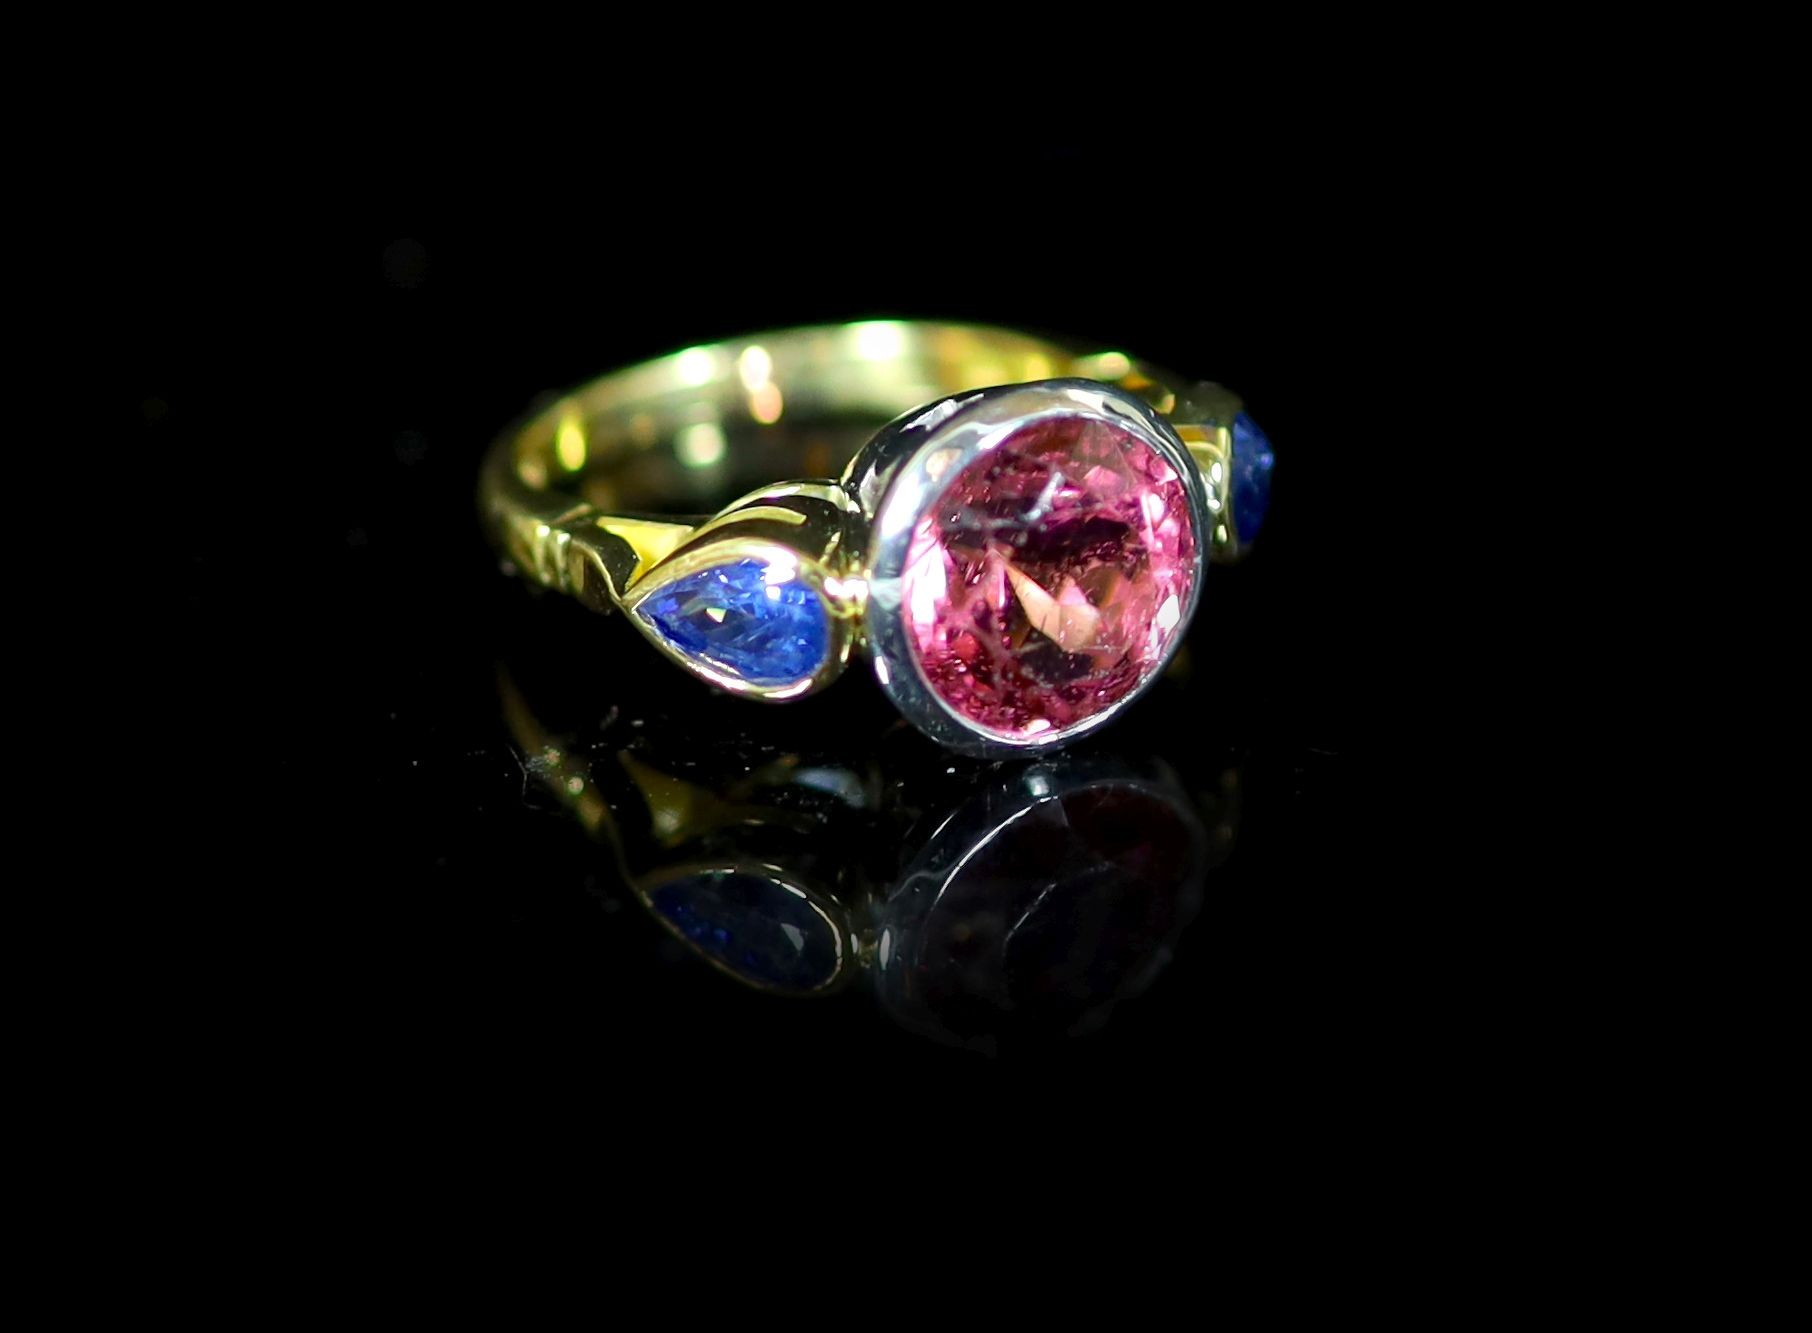 A Theo Fennell 18ct gold, collet set single stone pink tourmaline and two stone pear shaped sapphire set dress ring